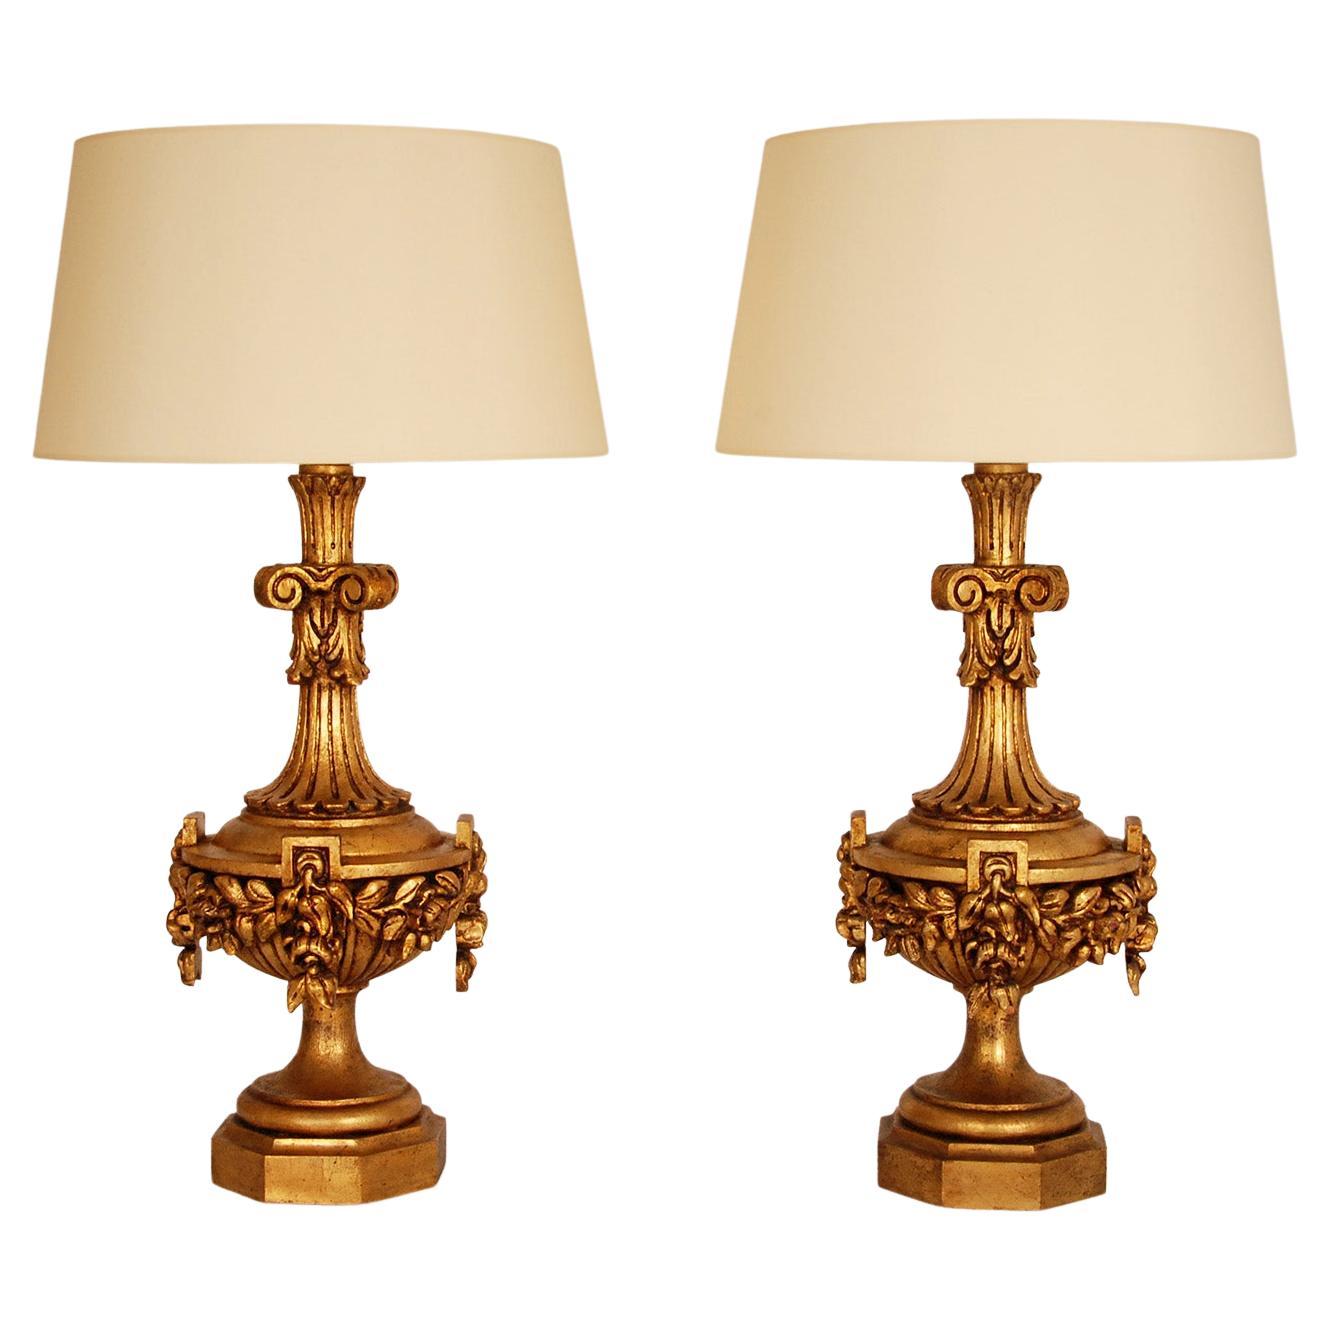 Vintage Italian Gold Giltwood Lamps Carved Neoclassal Vases  Table Lamps a Pair For Sale